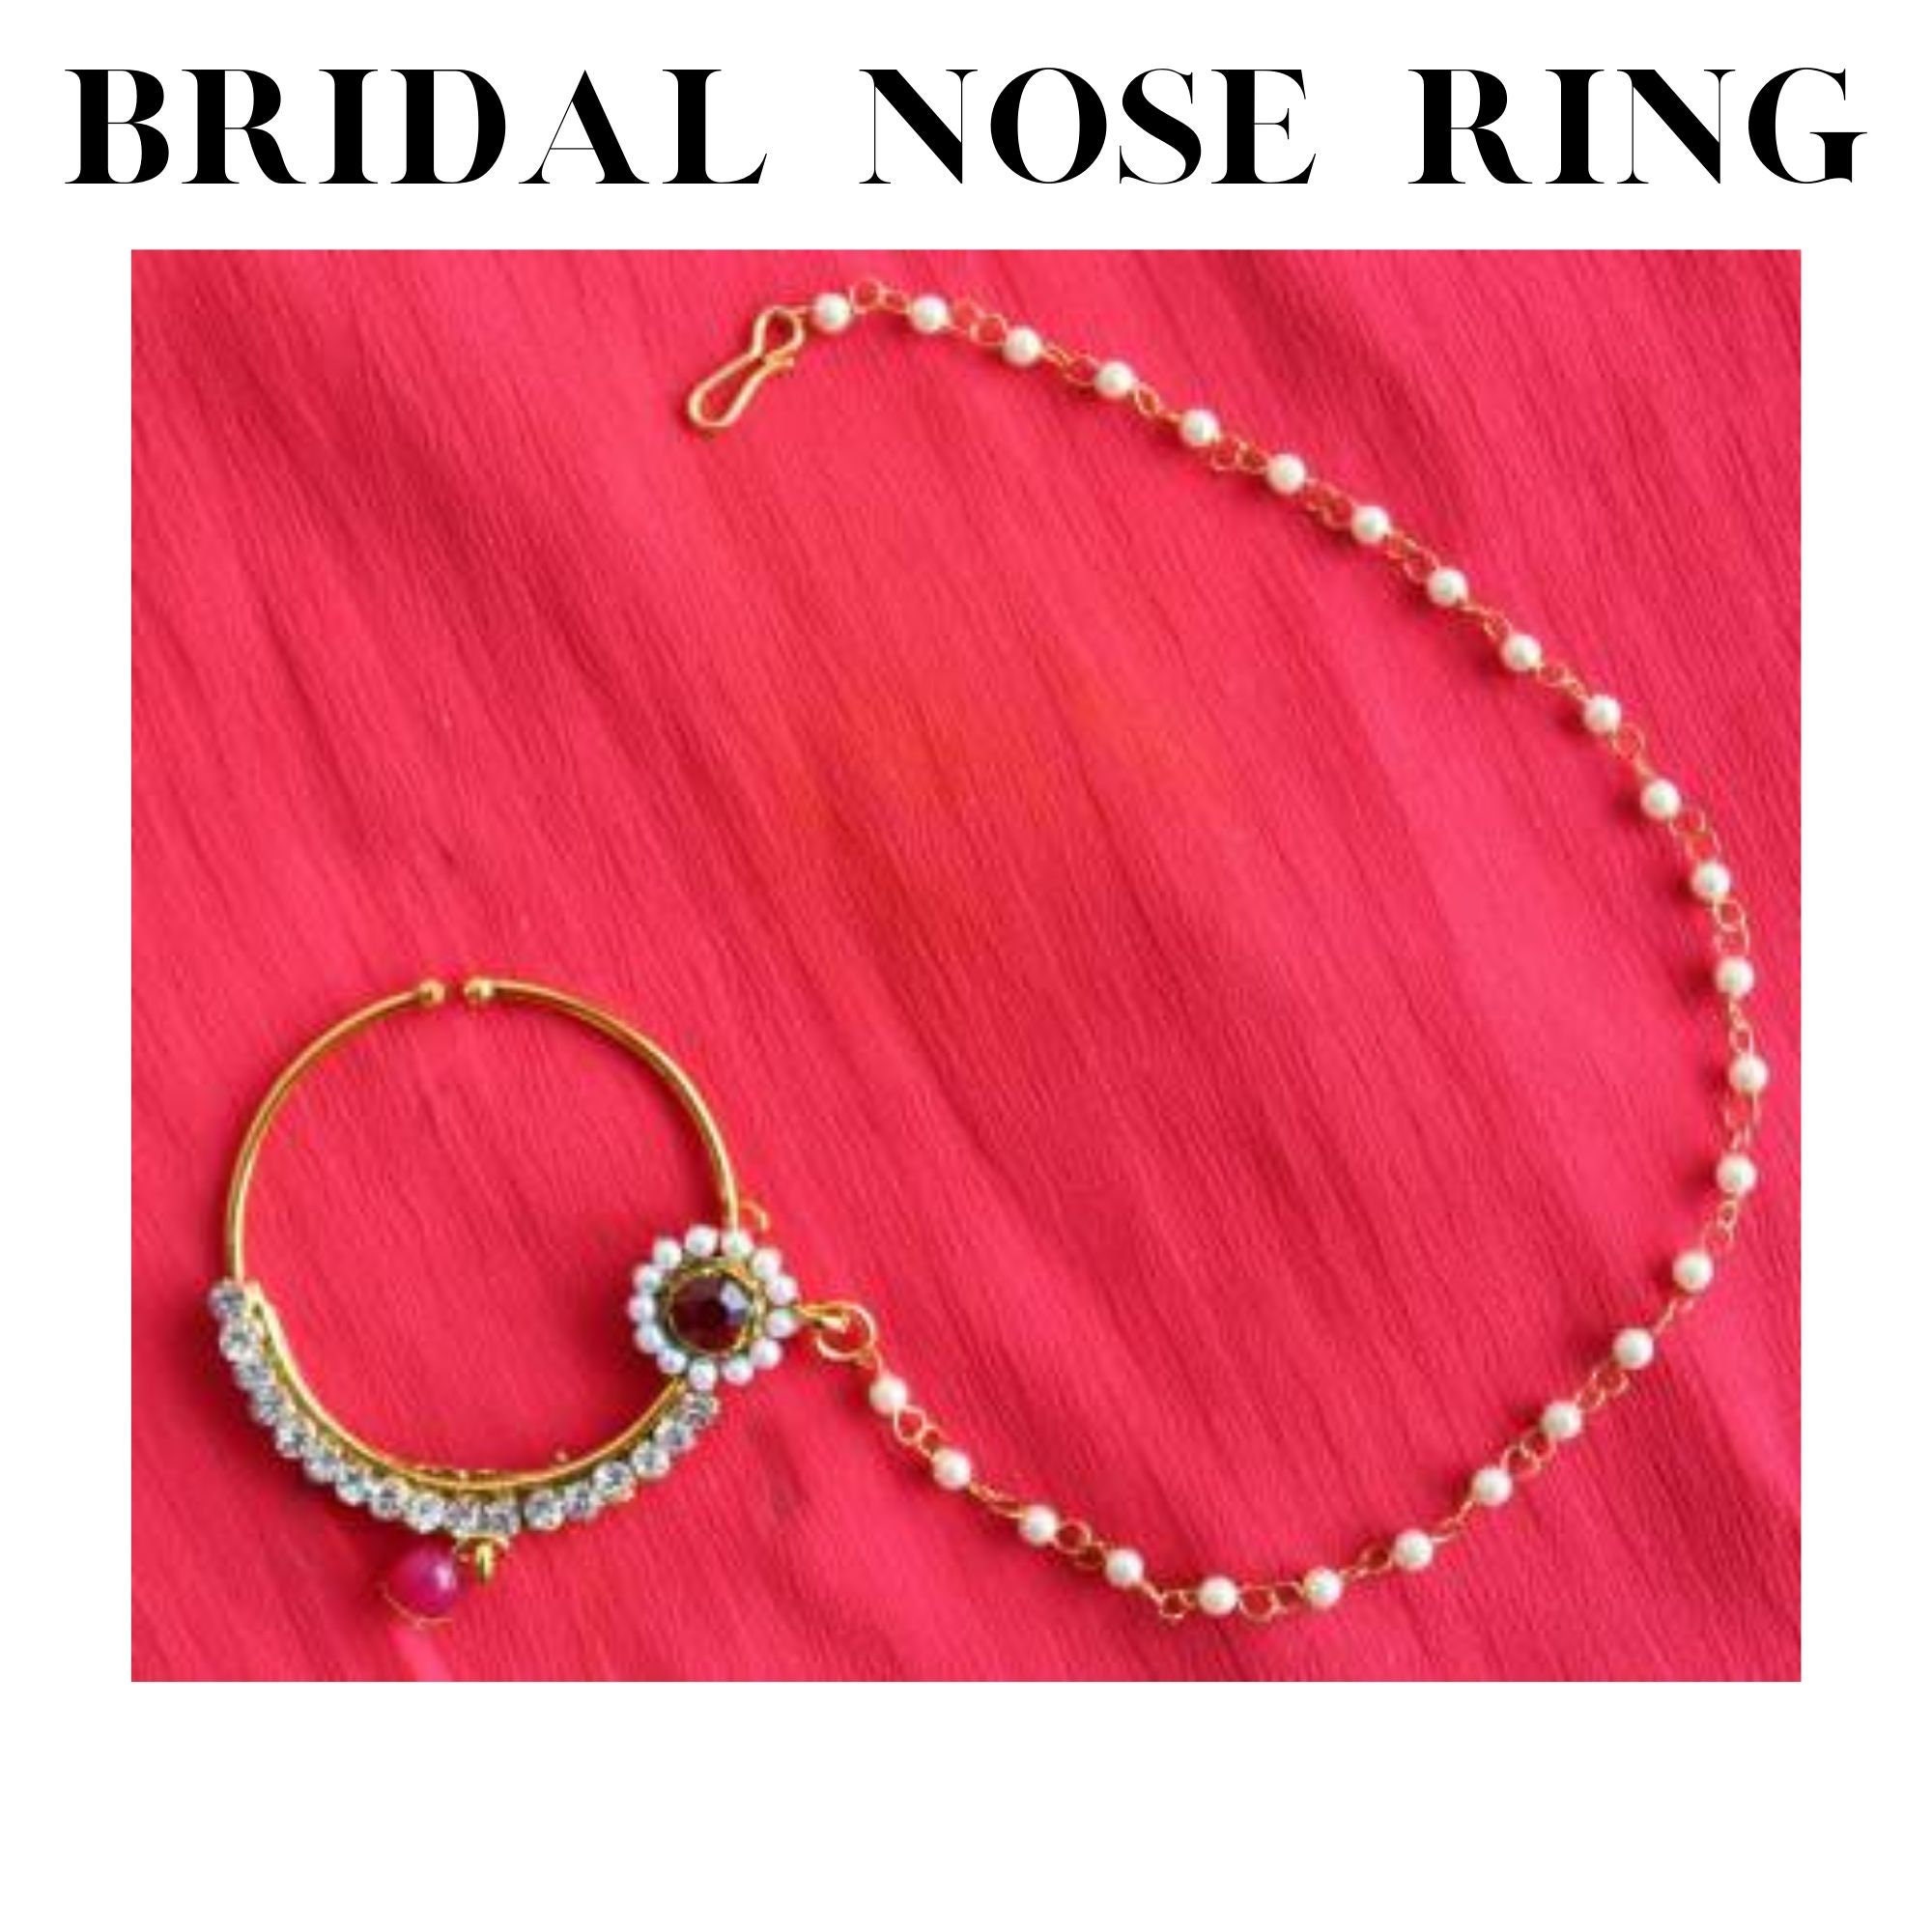 Buy Chinar Jewels Bridal Nose Ring Nathiya/Nath/Nathni/Nathaniya Gold  Plated with Kundan Stones in Golden Color with Pearl Chain. Nath Silver &  Alloy with 5.5 cm Diameter can be wore in and Parties